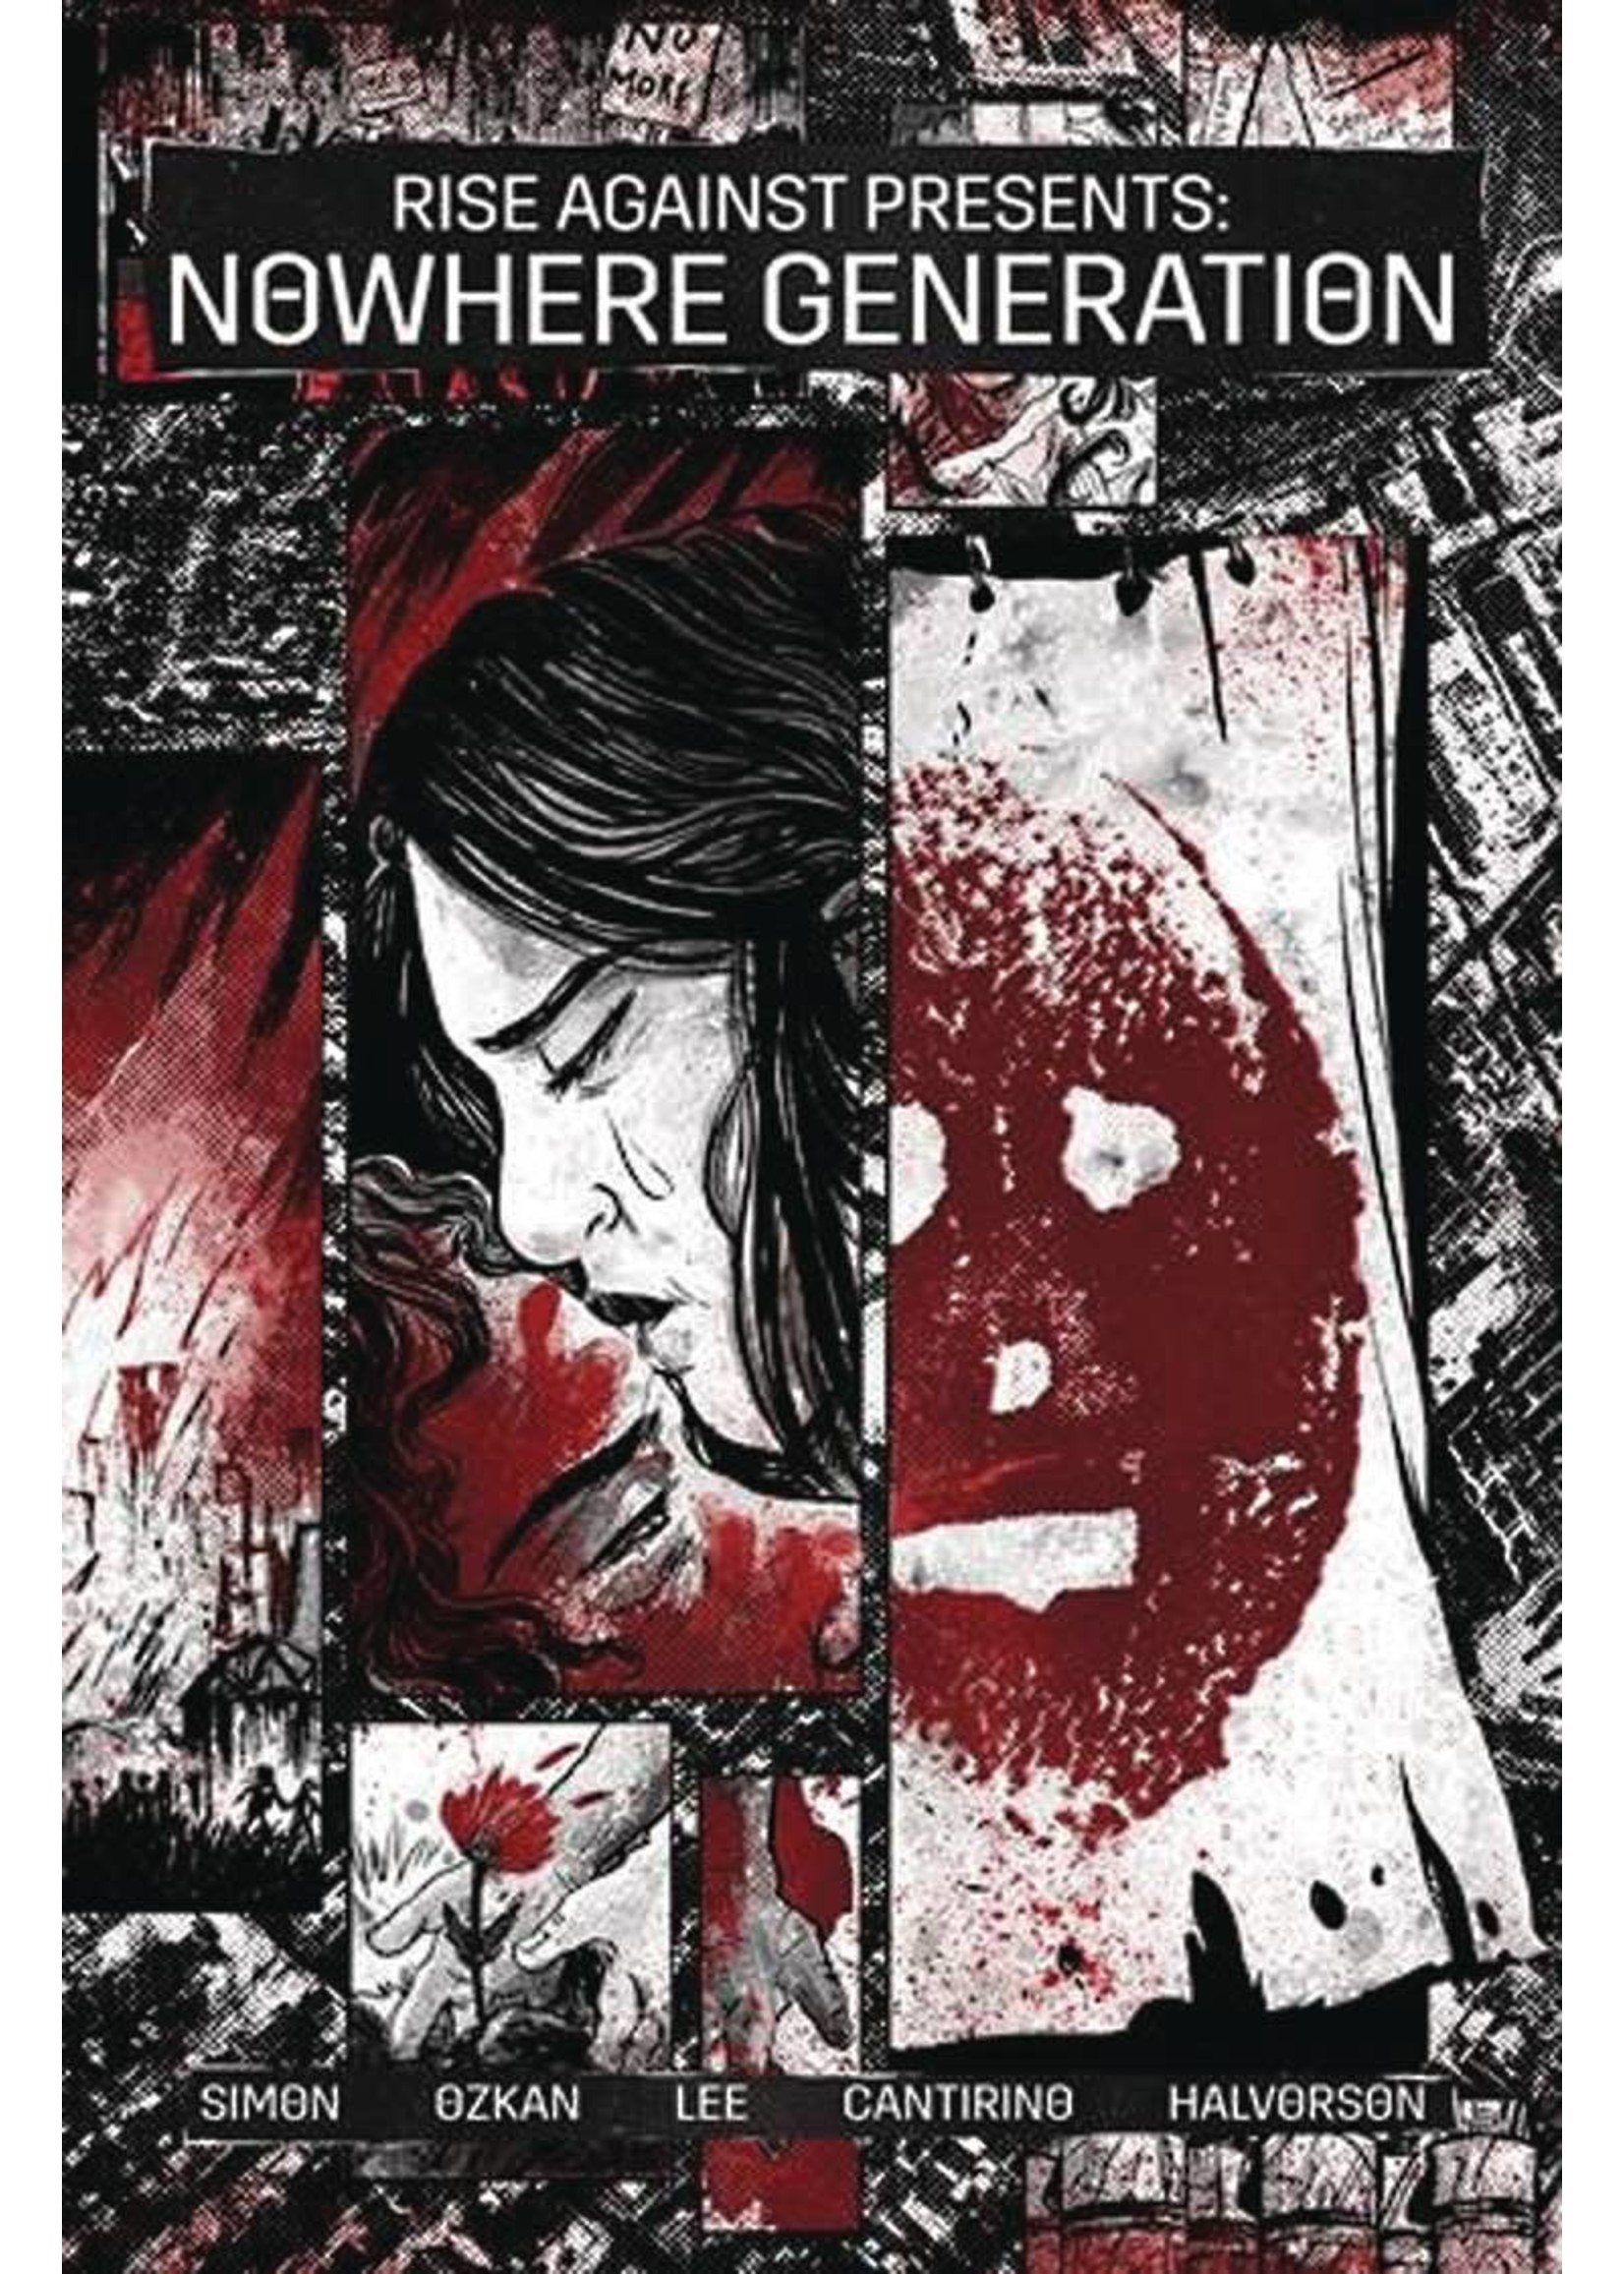 Z2 COMICS NOWHERE GENERATIONS PRESENTED BY RISE AGAINST